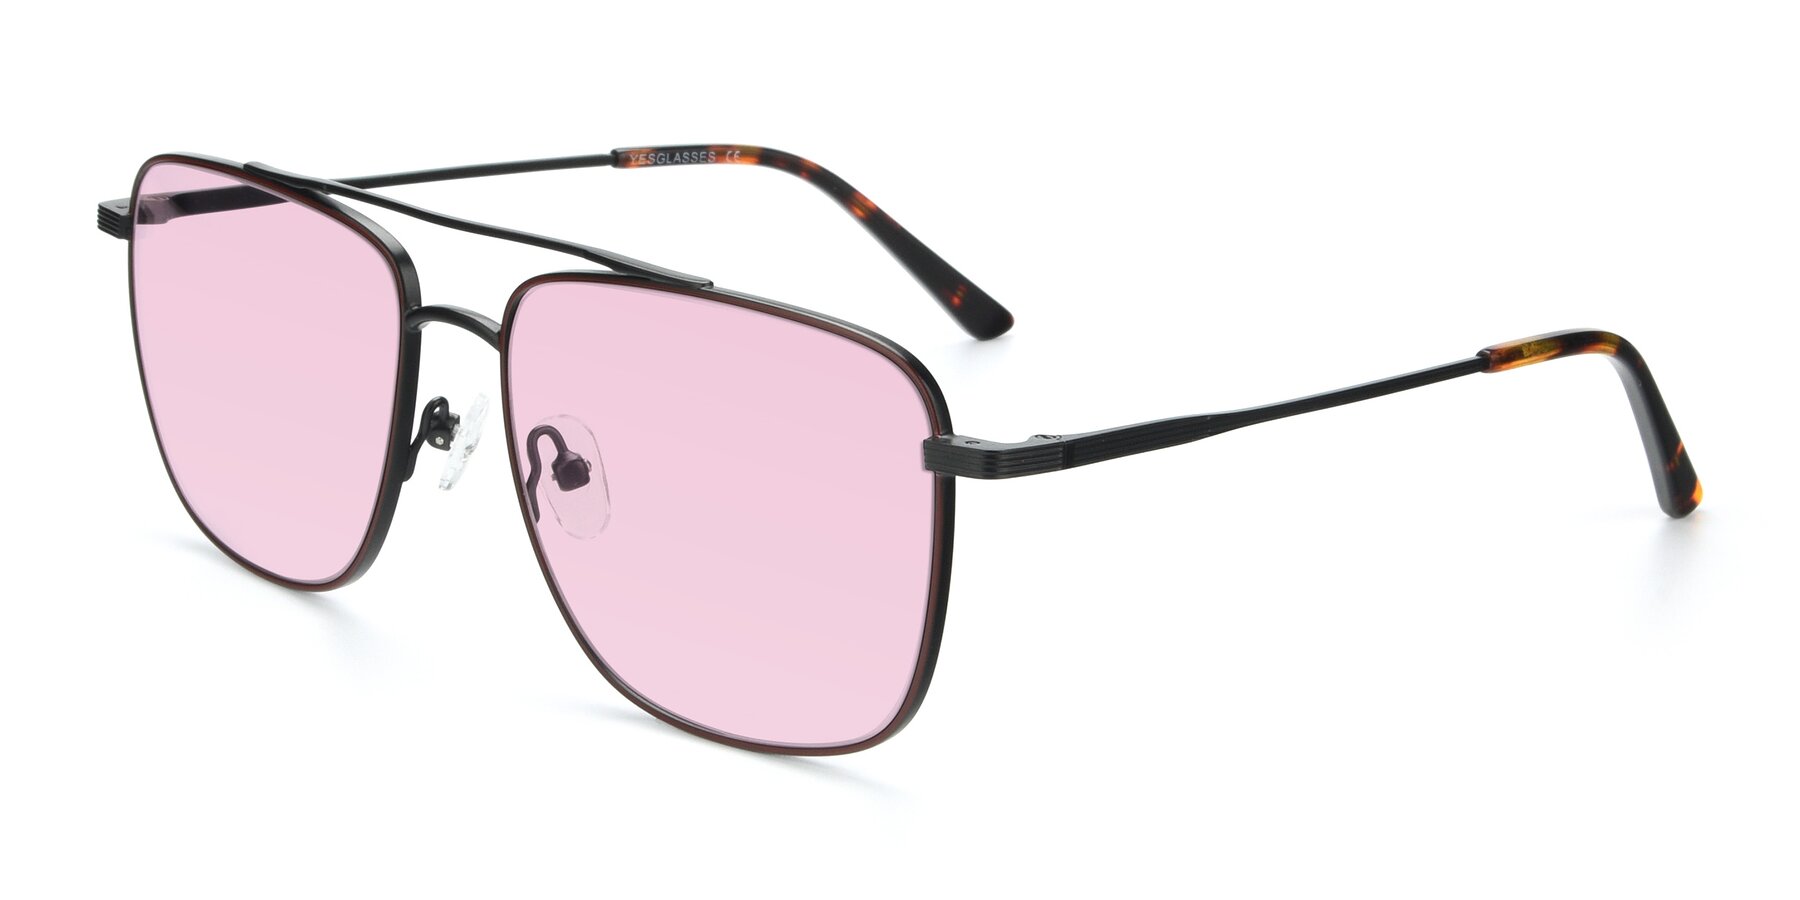 Angle of 9519 in Brown-Black with Light Pink Tinted Lenses